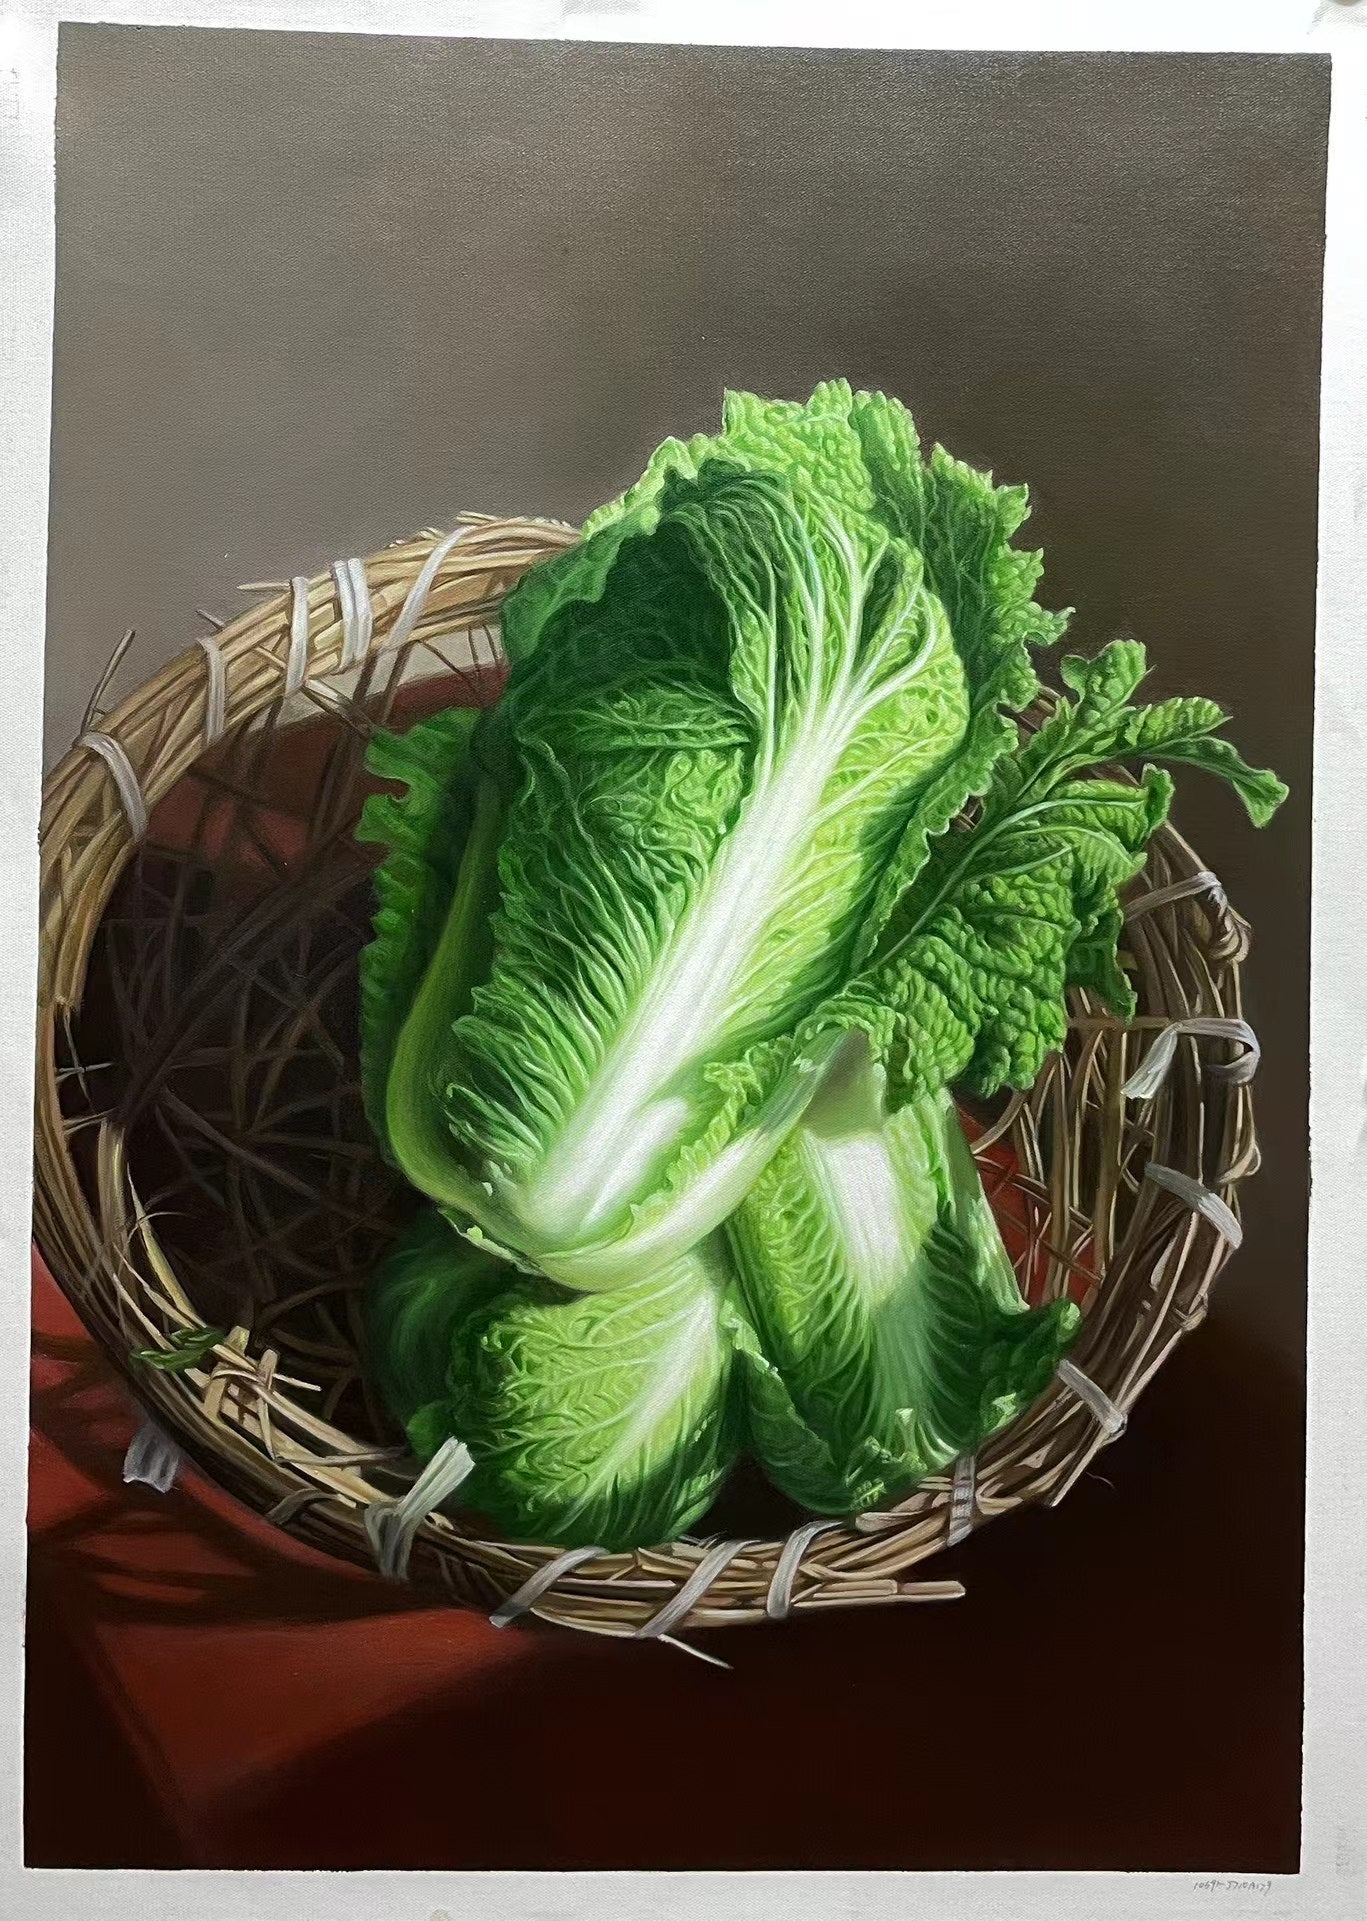 Realistic Chinese Cabbage Handmade Oil Painting on Canvas Wall Decor 28 by 39 M2025